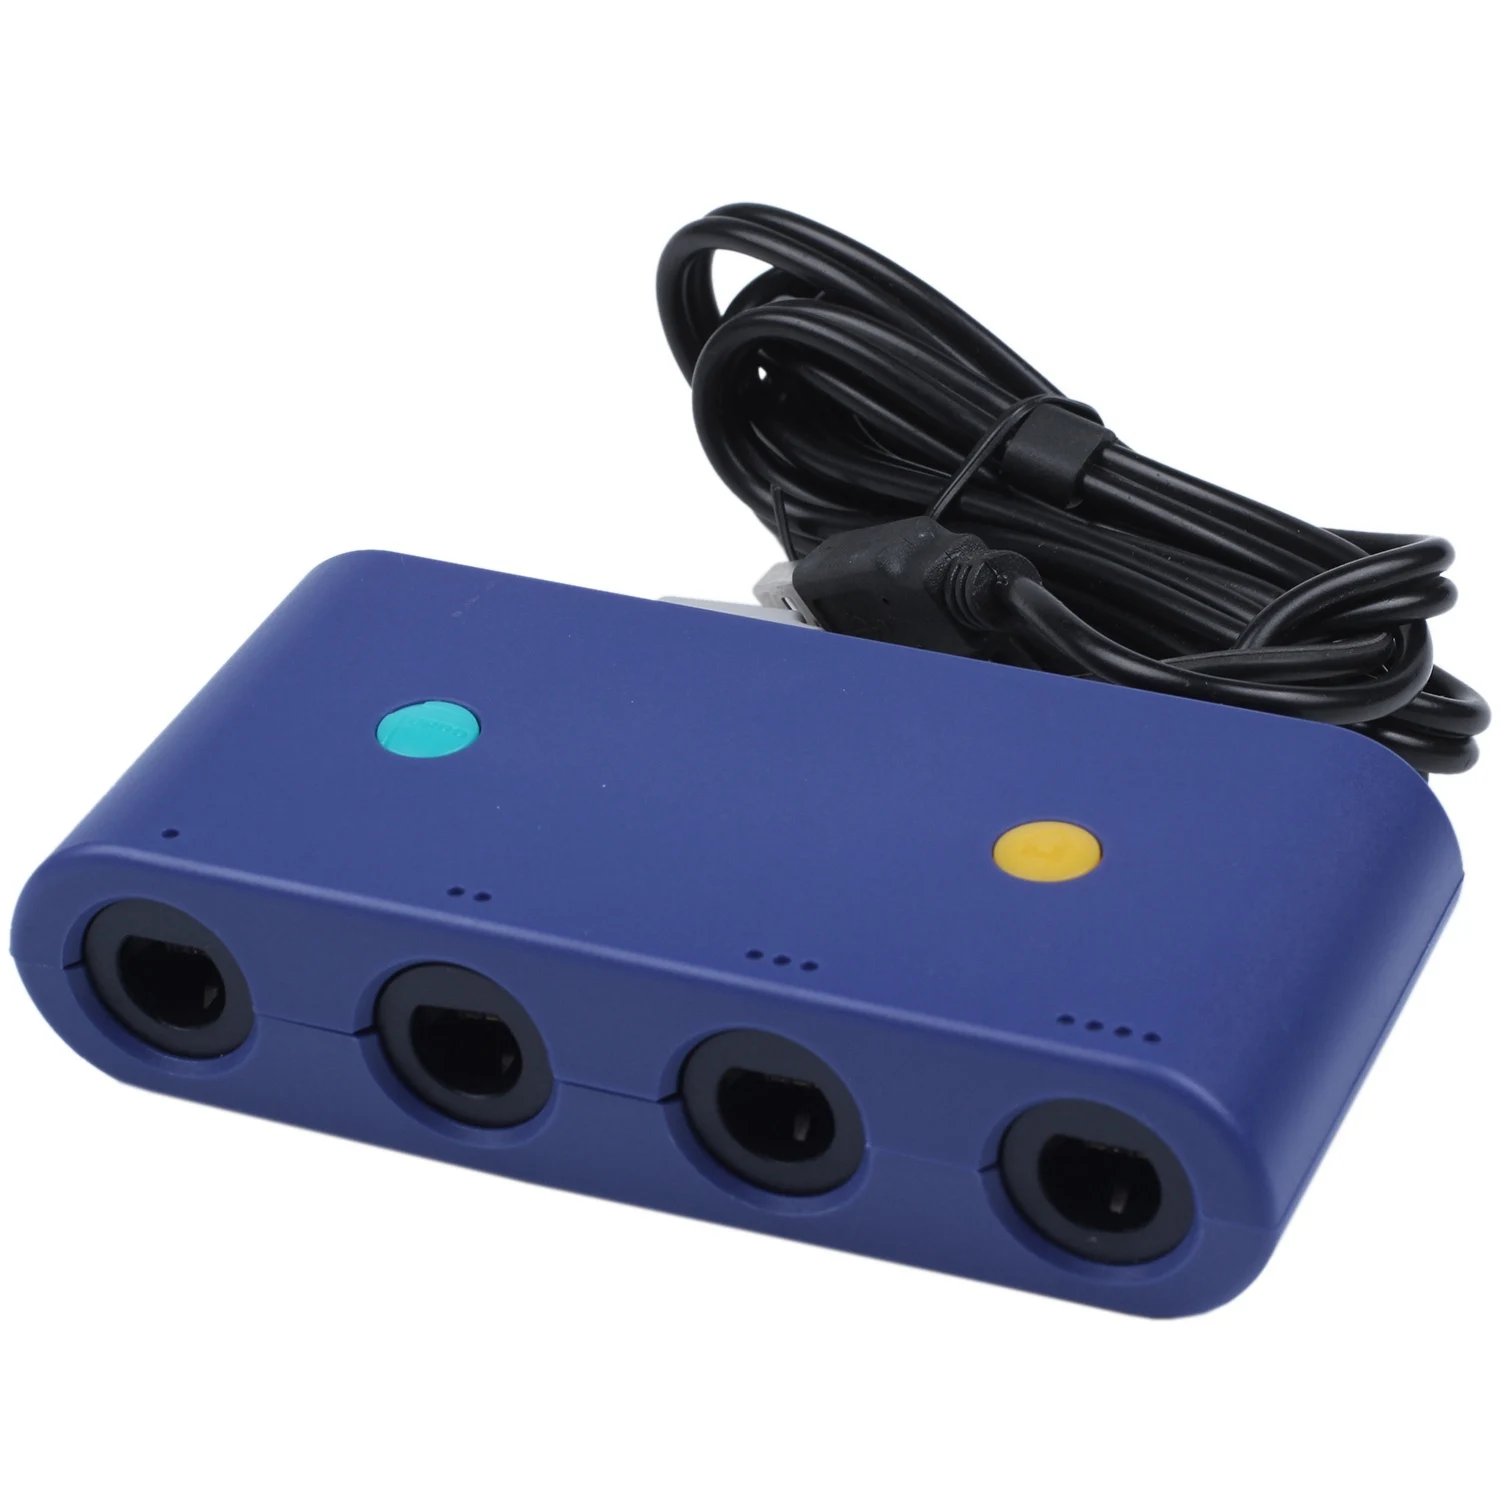 

For Gamecube Controller Adapter For Nintendo Switch Wii U Pc 4 Ports With Turbo And Home Button Mode No Driver